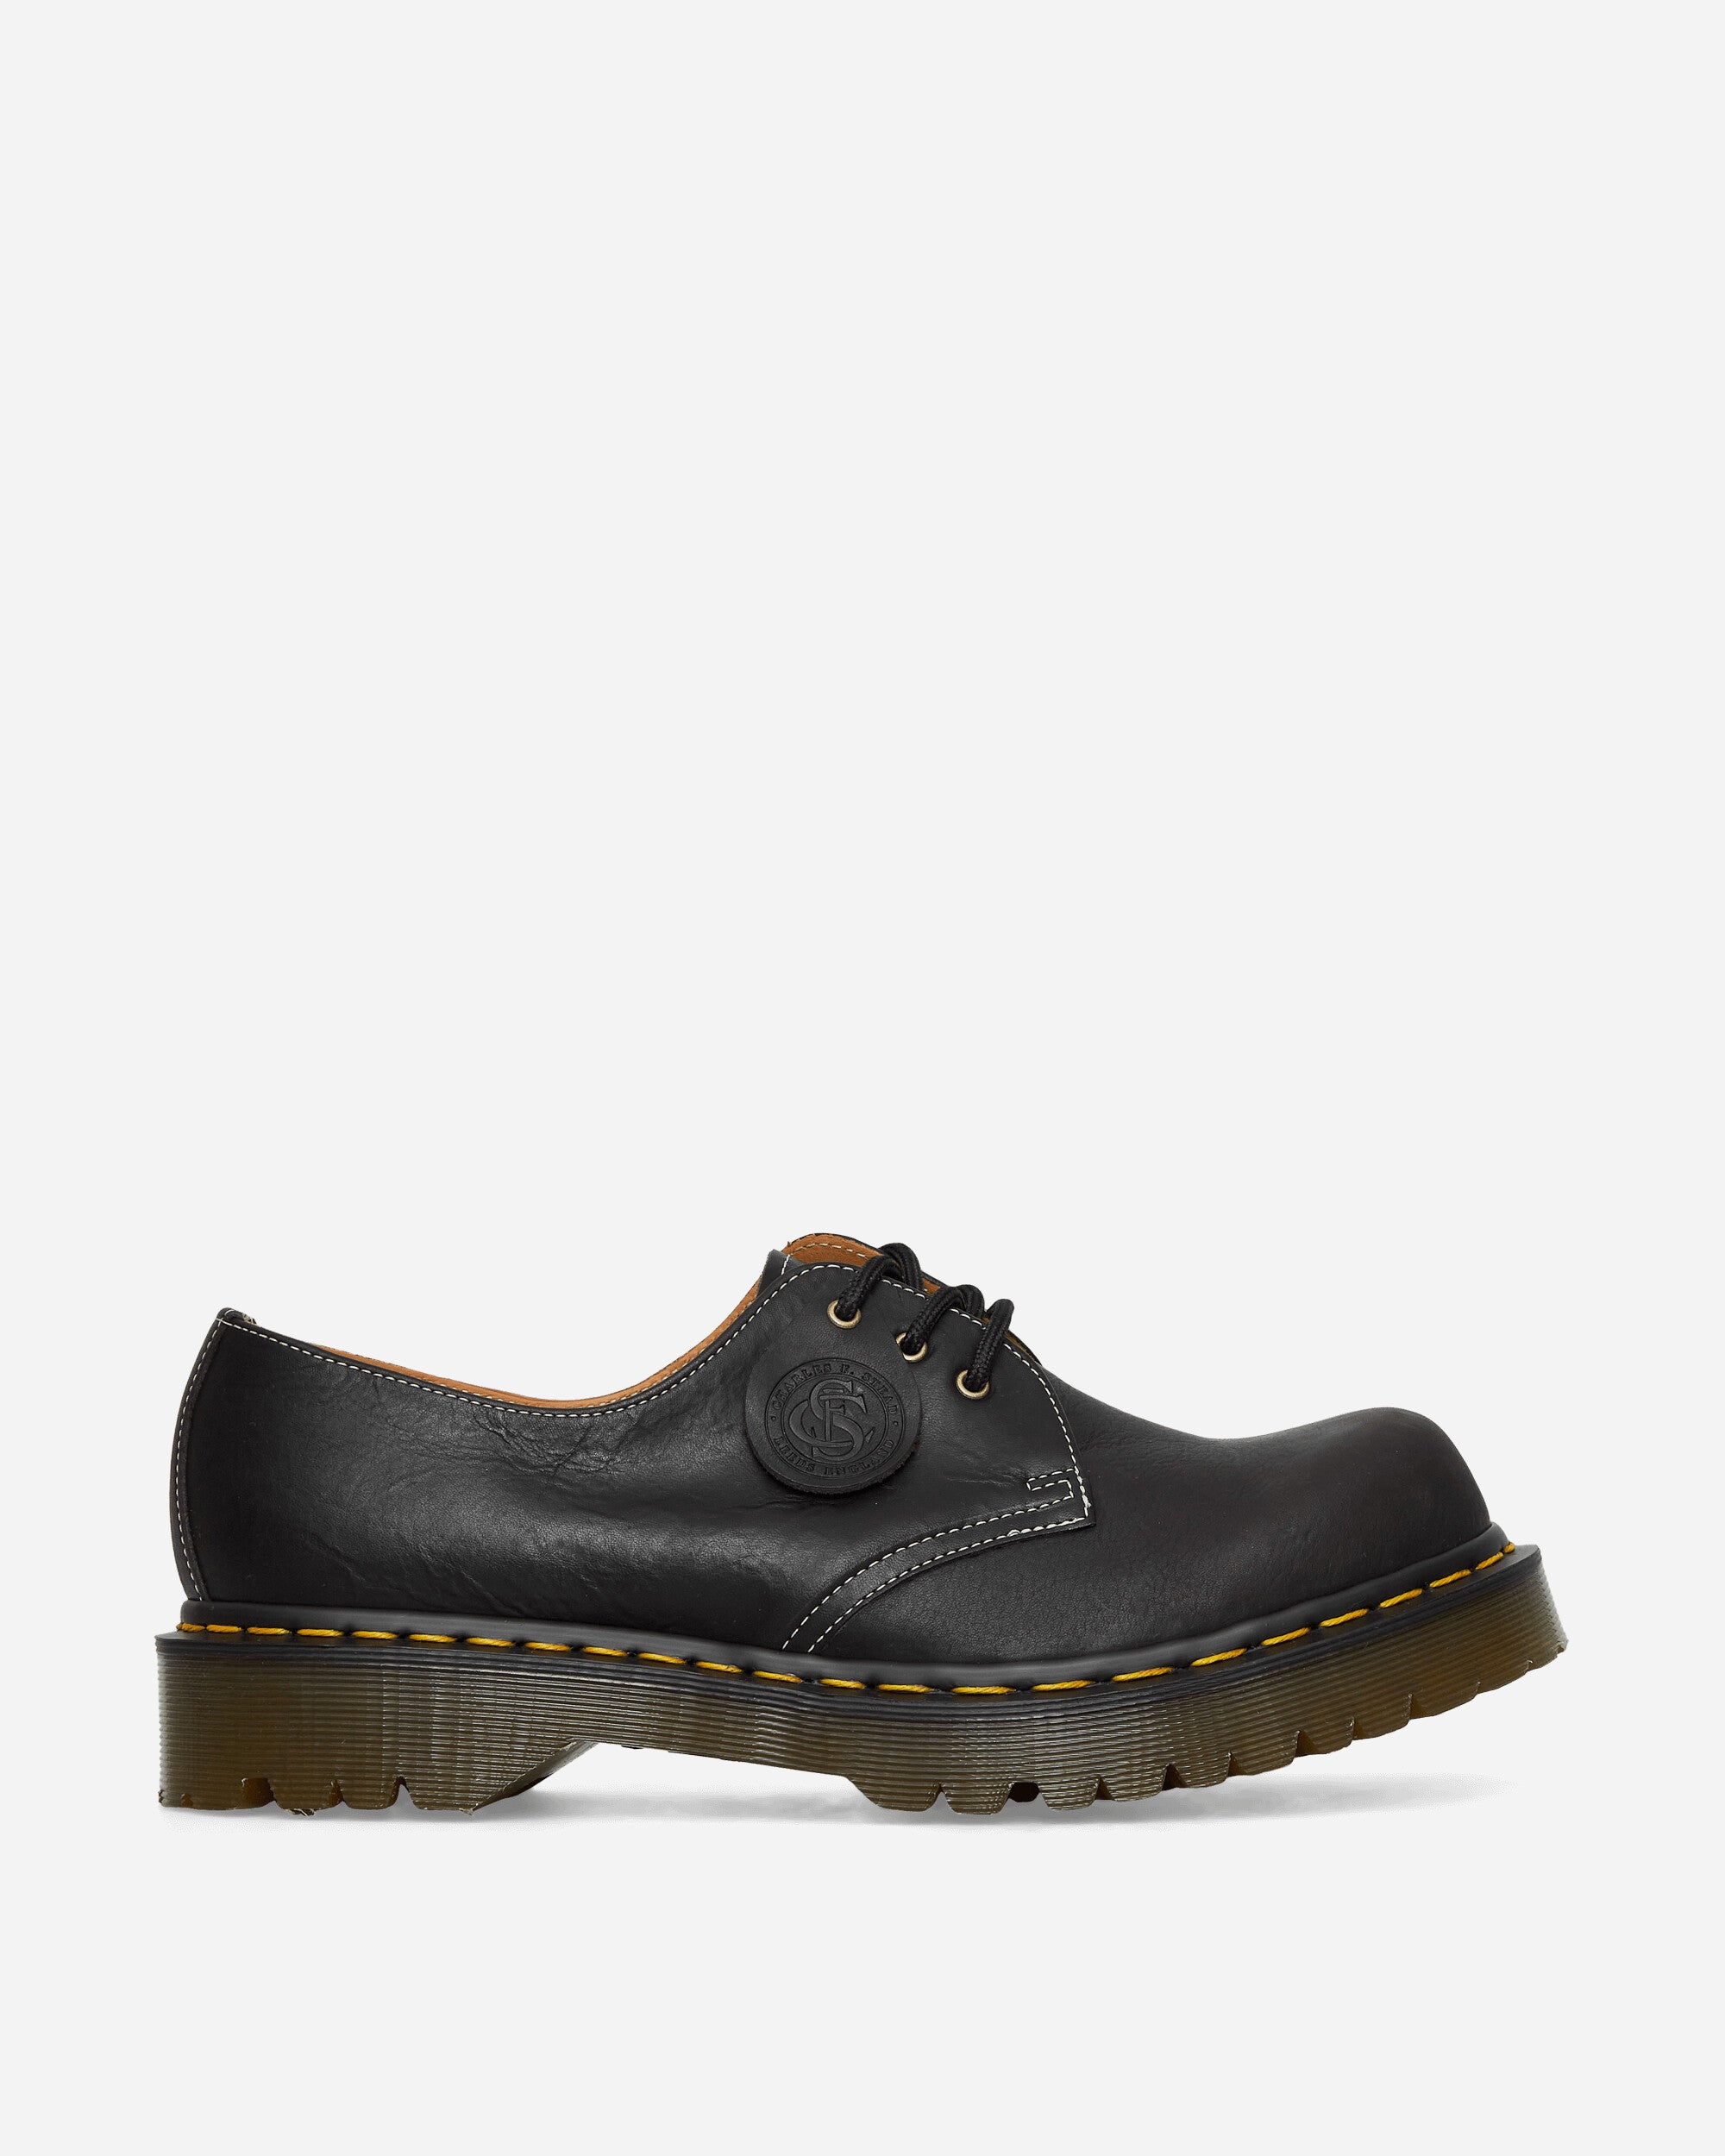 Dr. Martens 3 Eye Shoe 1461 Charcoal Grey Phoenix Classic Shoes Laced Up 31017057 001